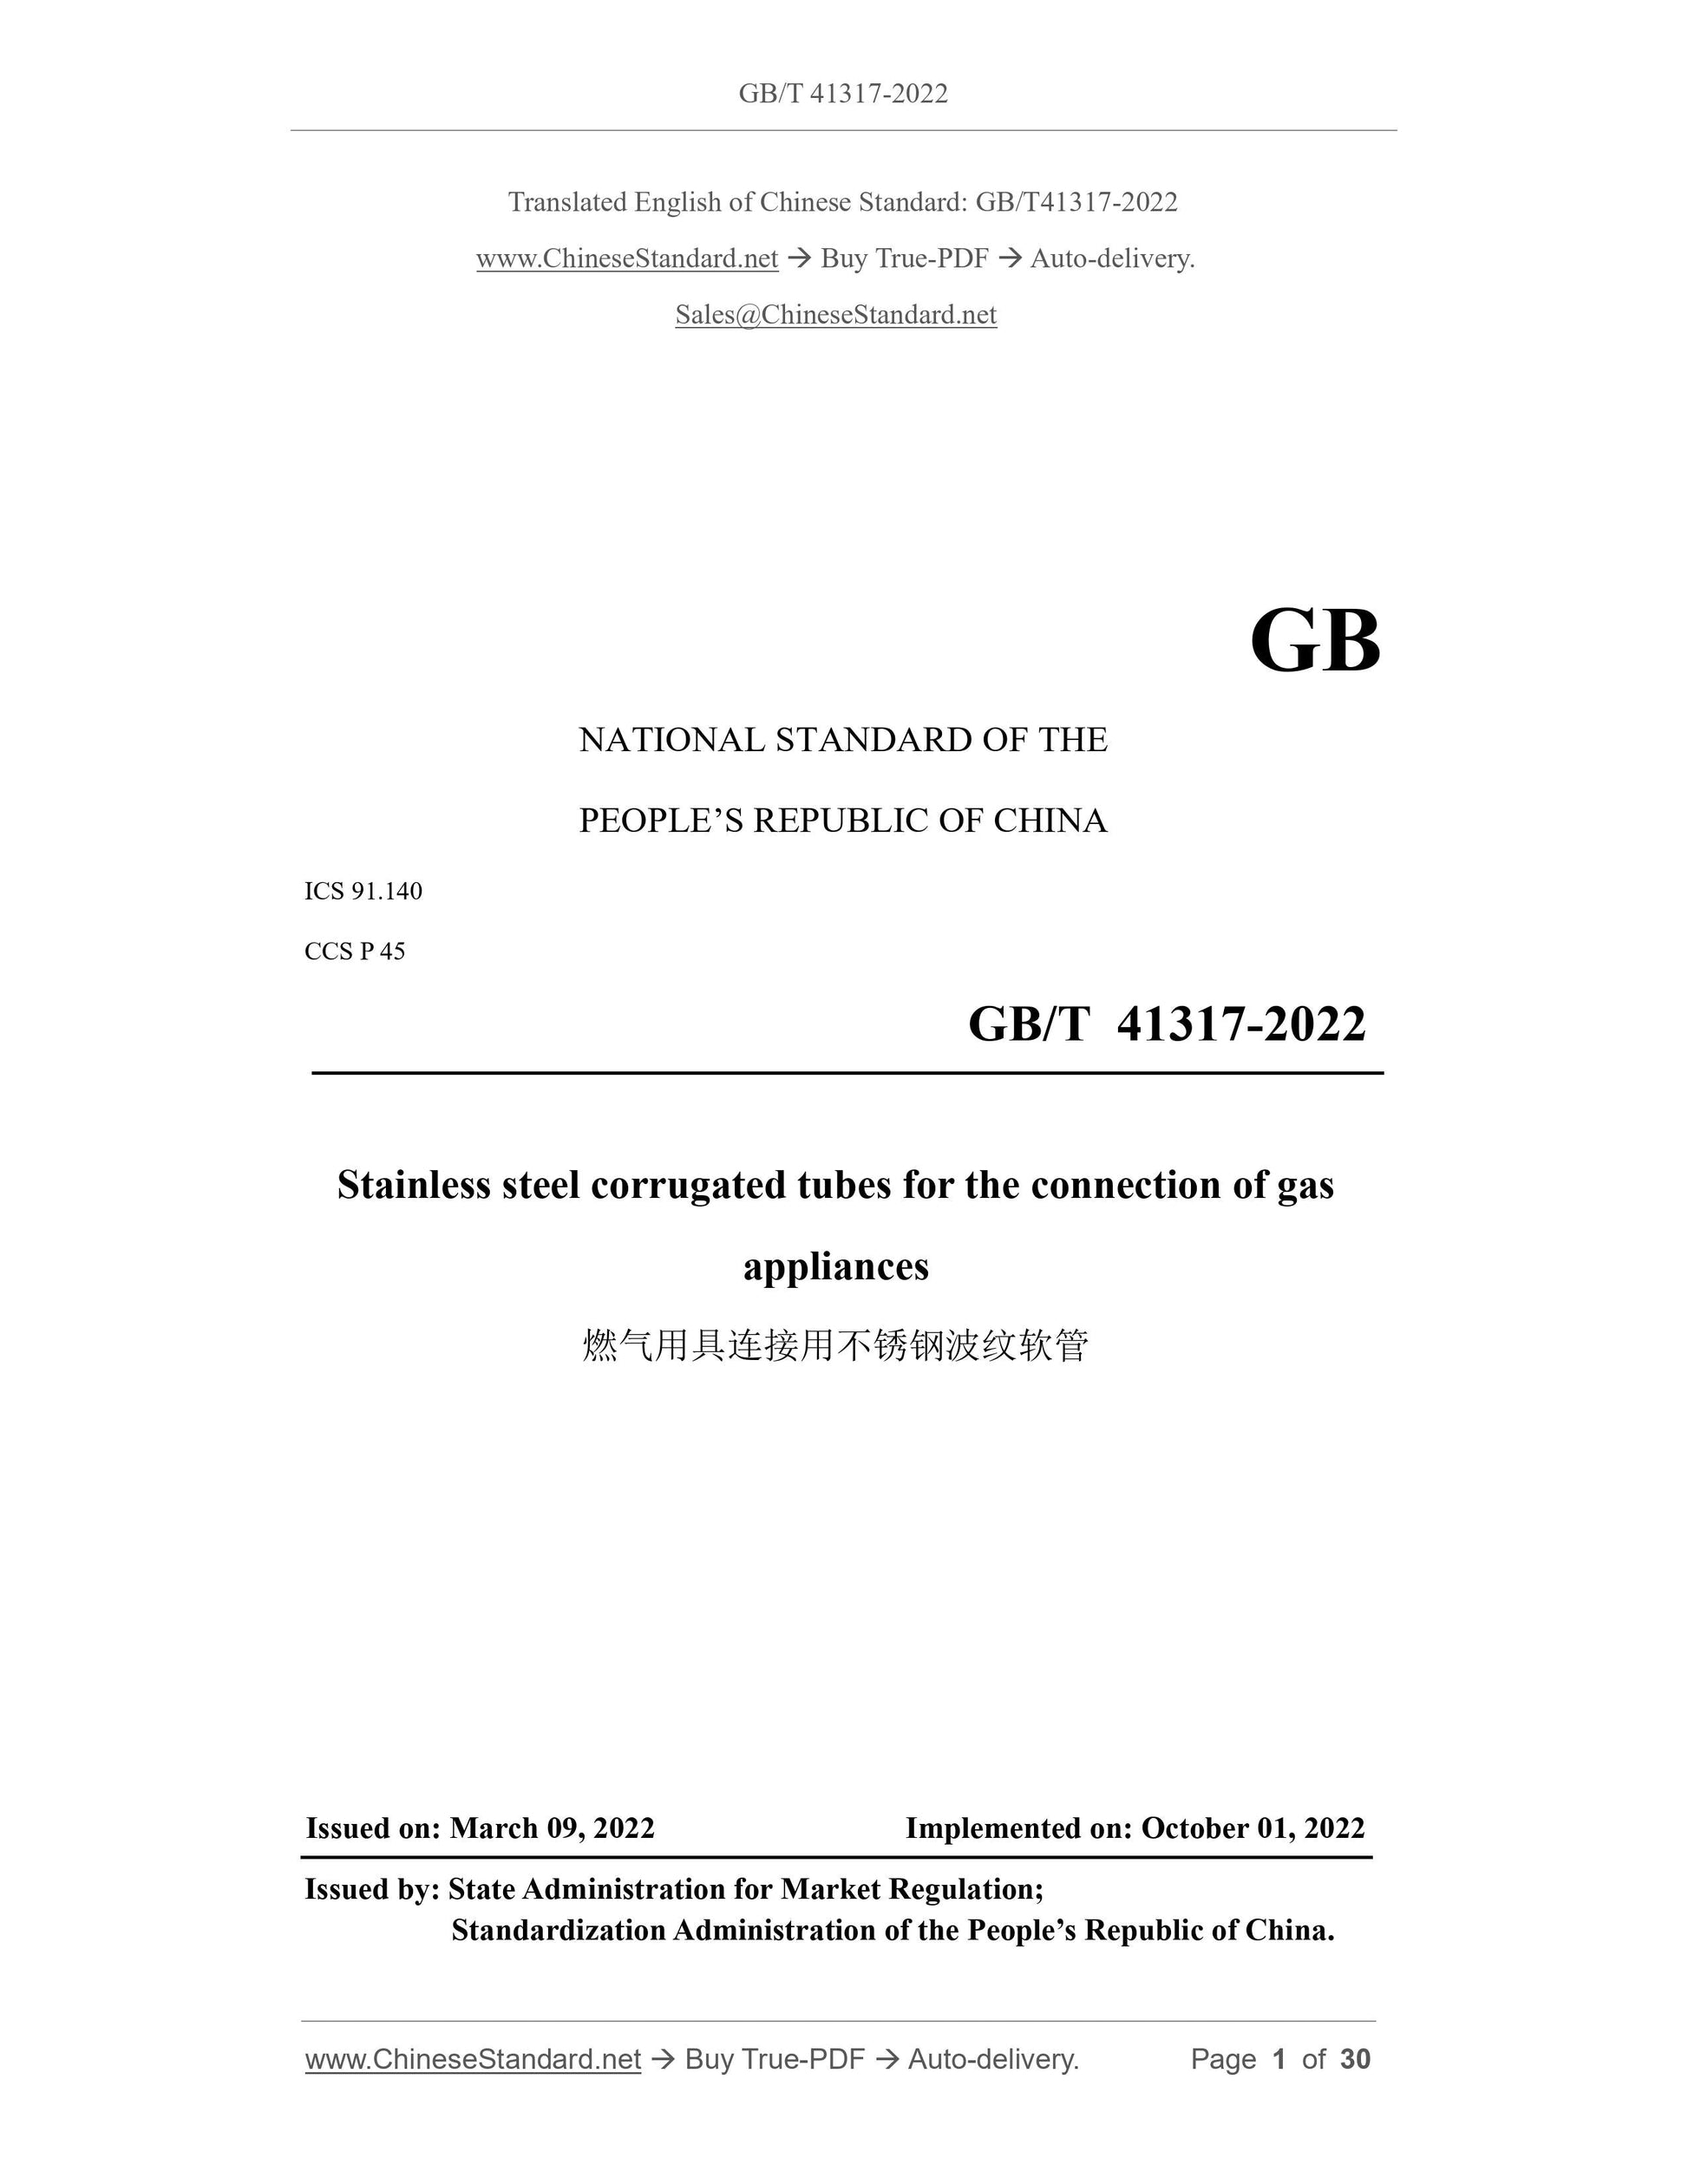 GB/T 41317-2022 Page 1